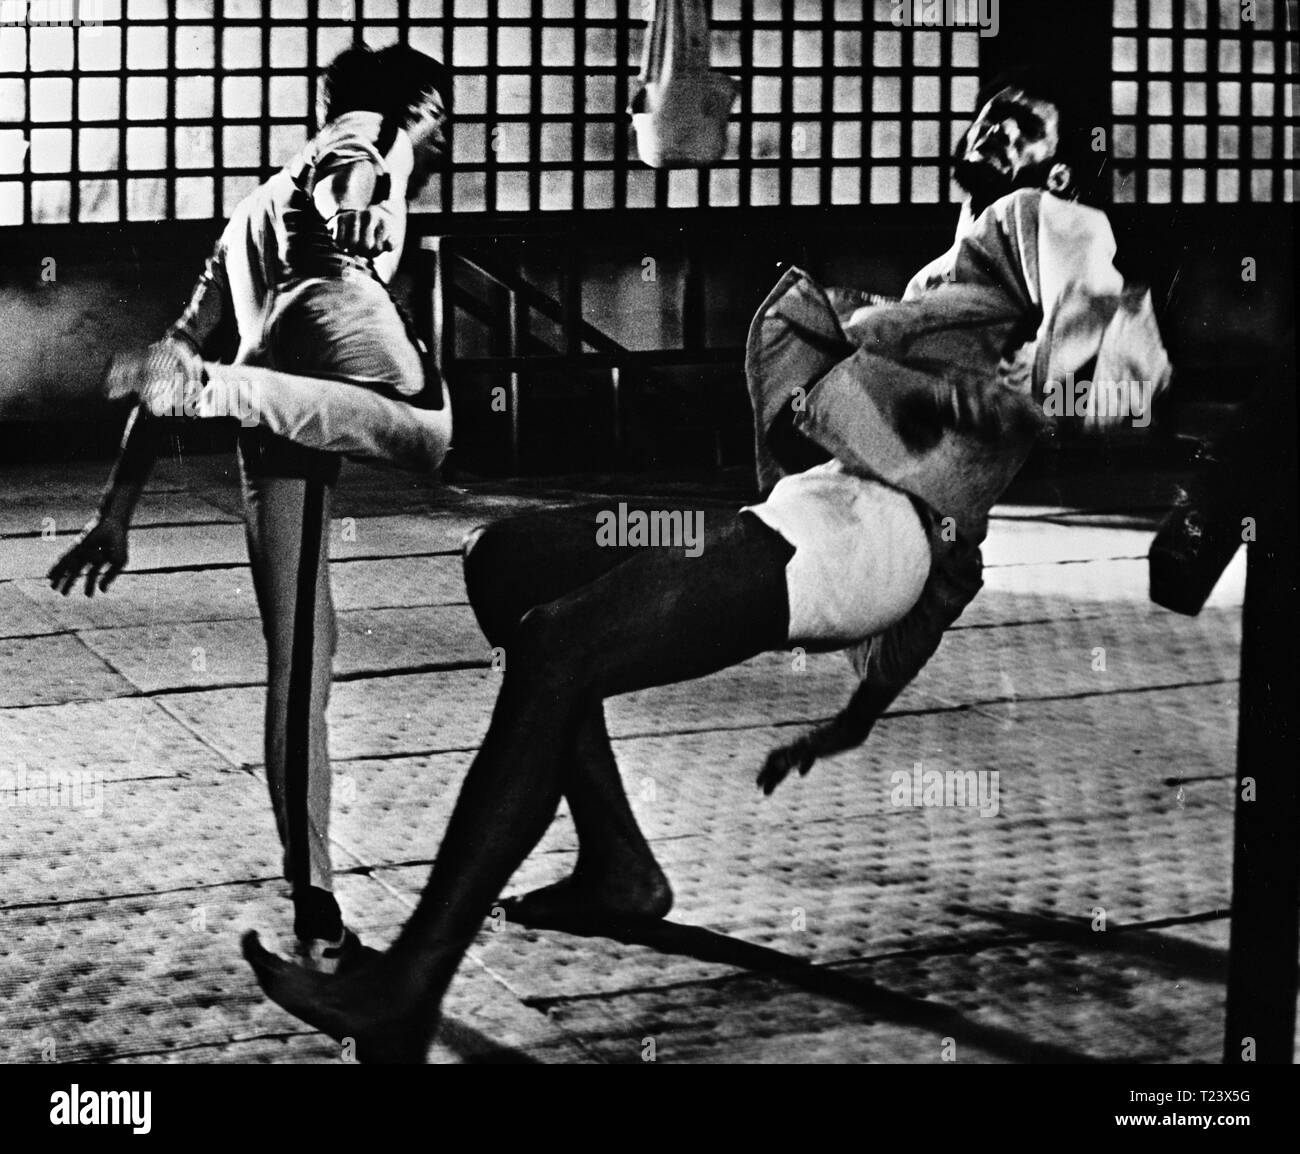 Game of Death (1978) Bruce Lee, Date: 1978 Stock Photo - Alamy